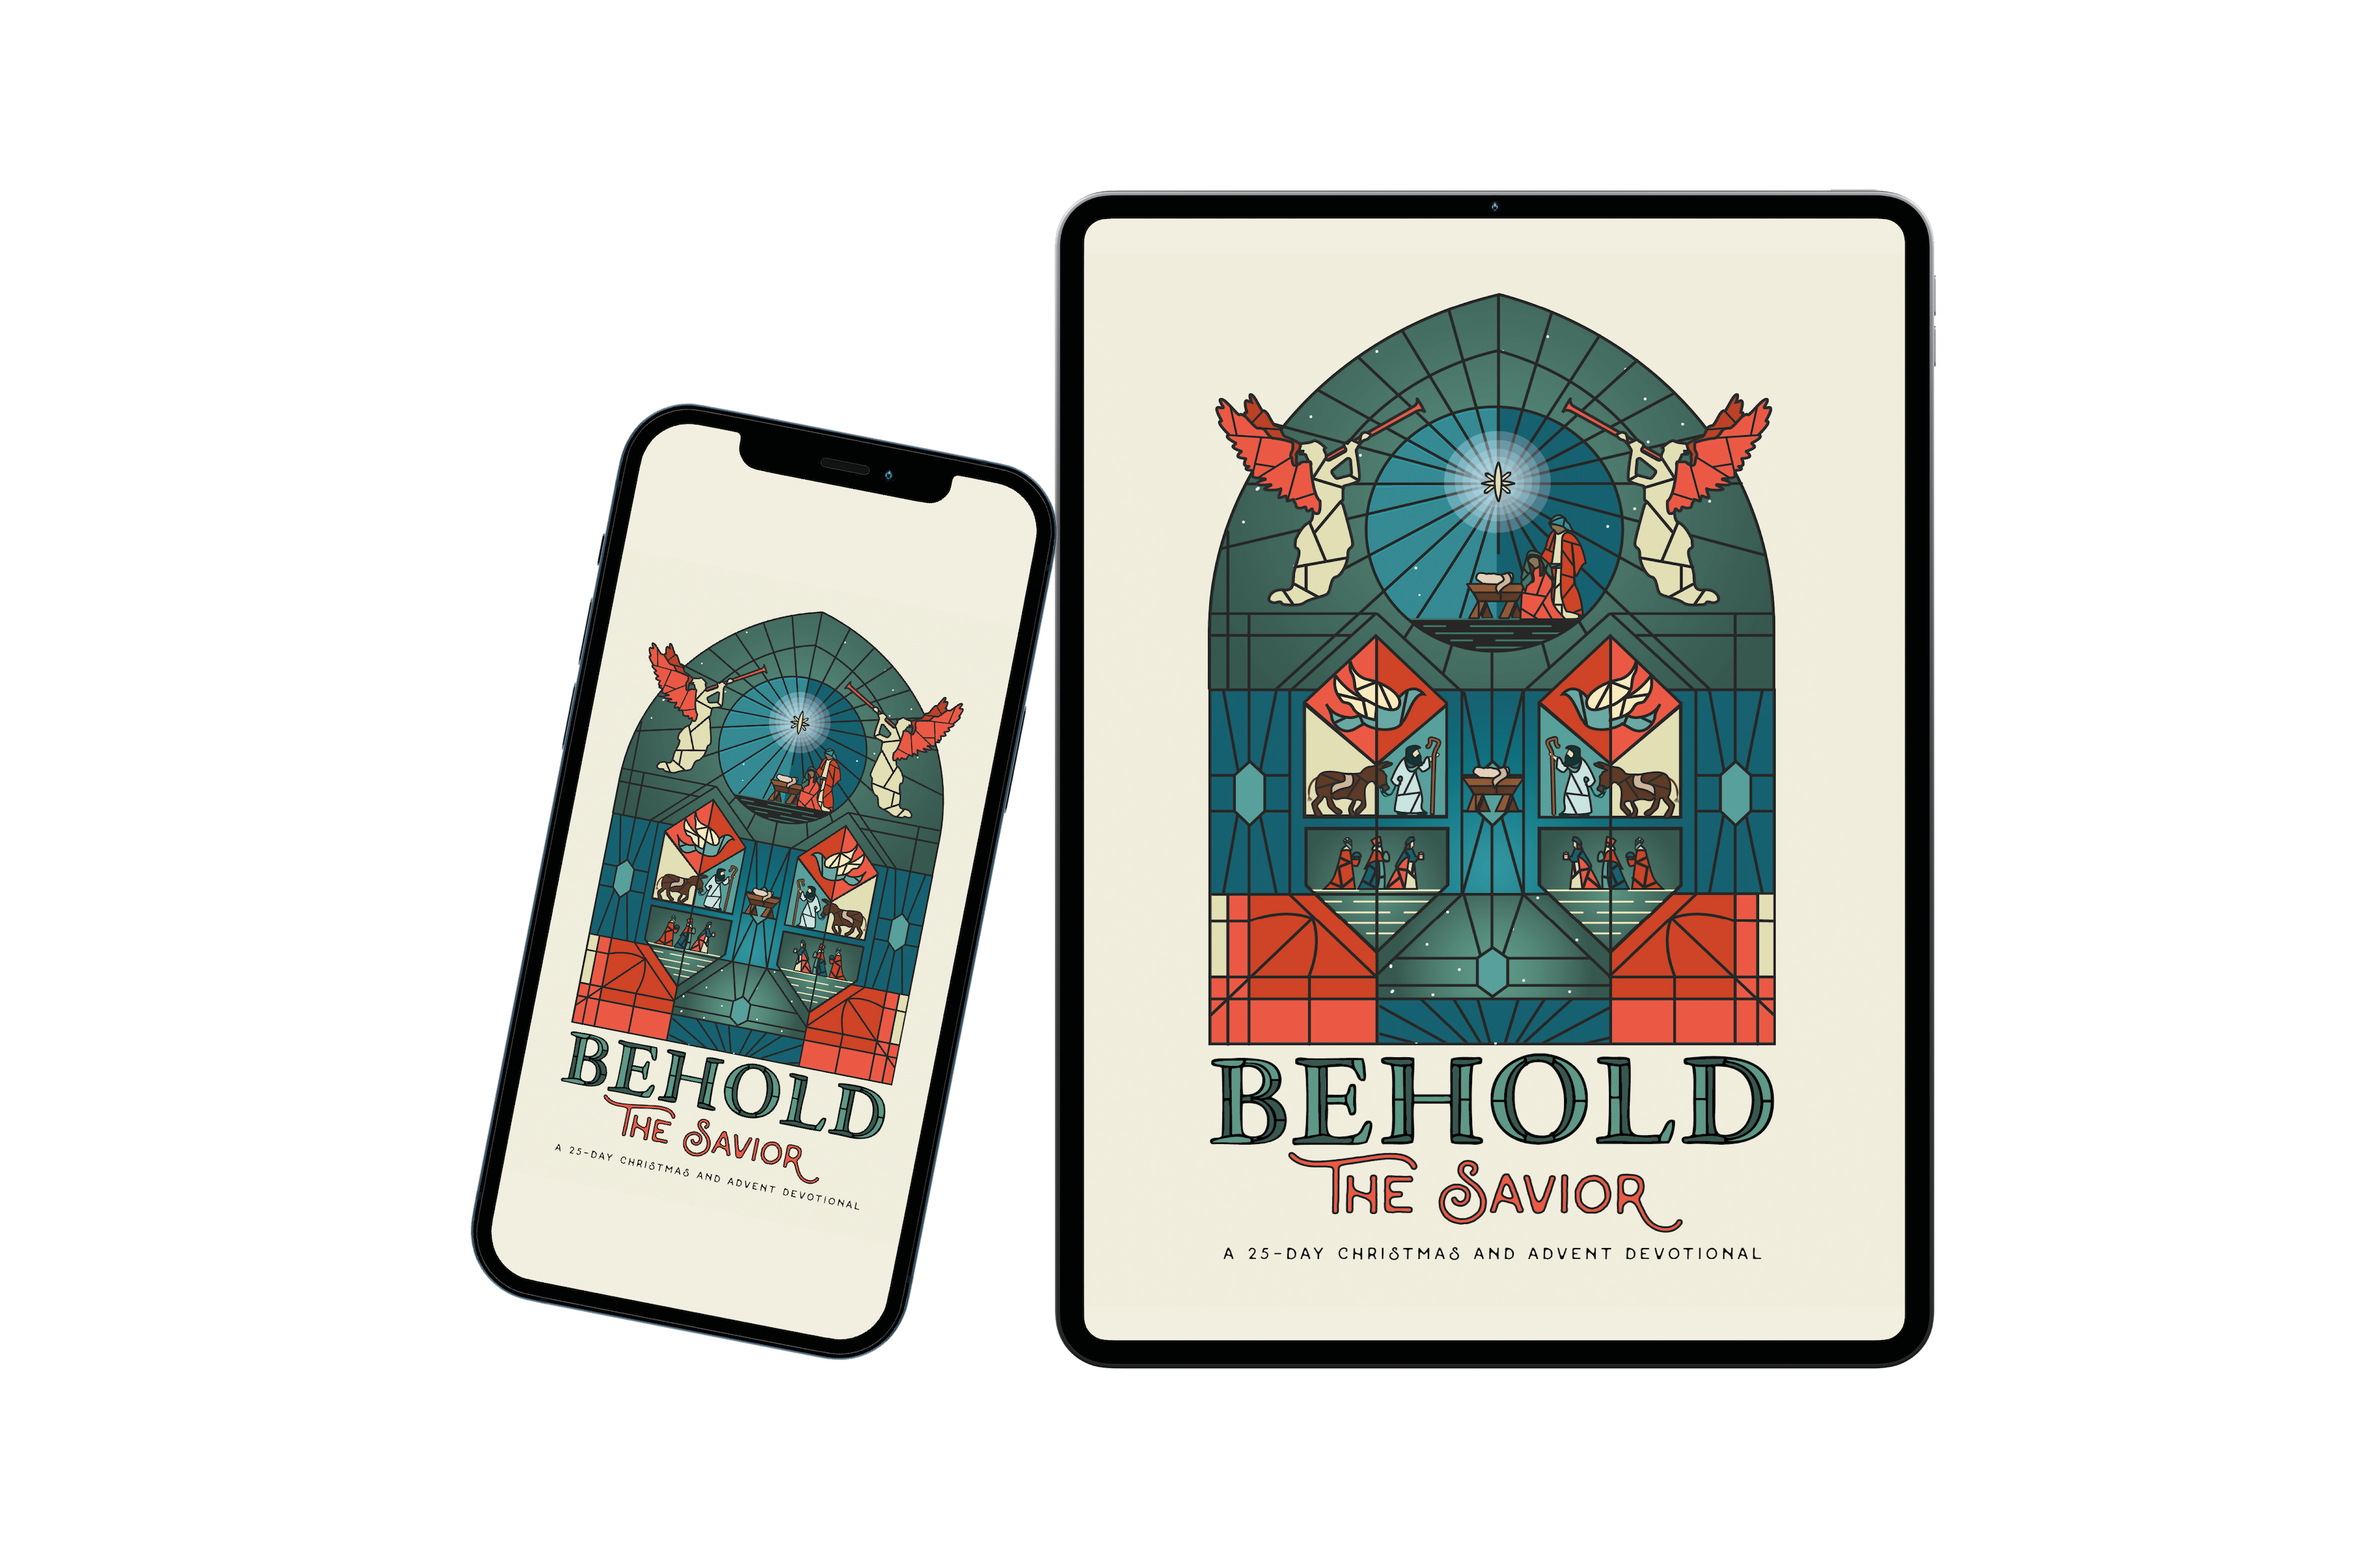 [DOWNLOADABLE VERSION] Behold the Savior: A 25-Day Christmas and Advent Devotional